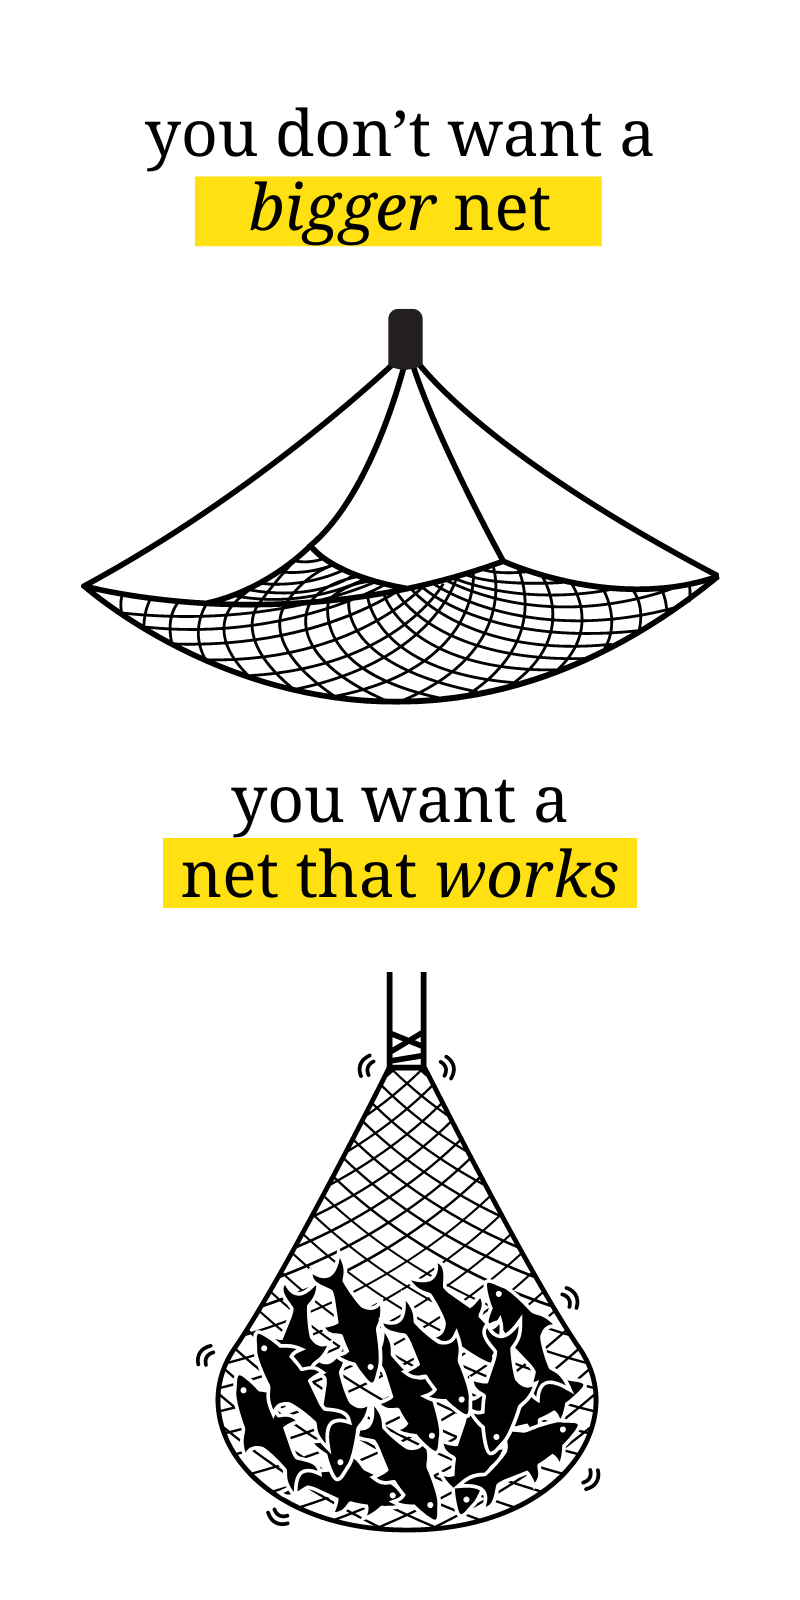 shopify cro
you don't want a bigger net
you want a net that works